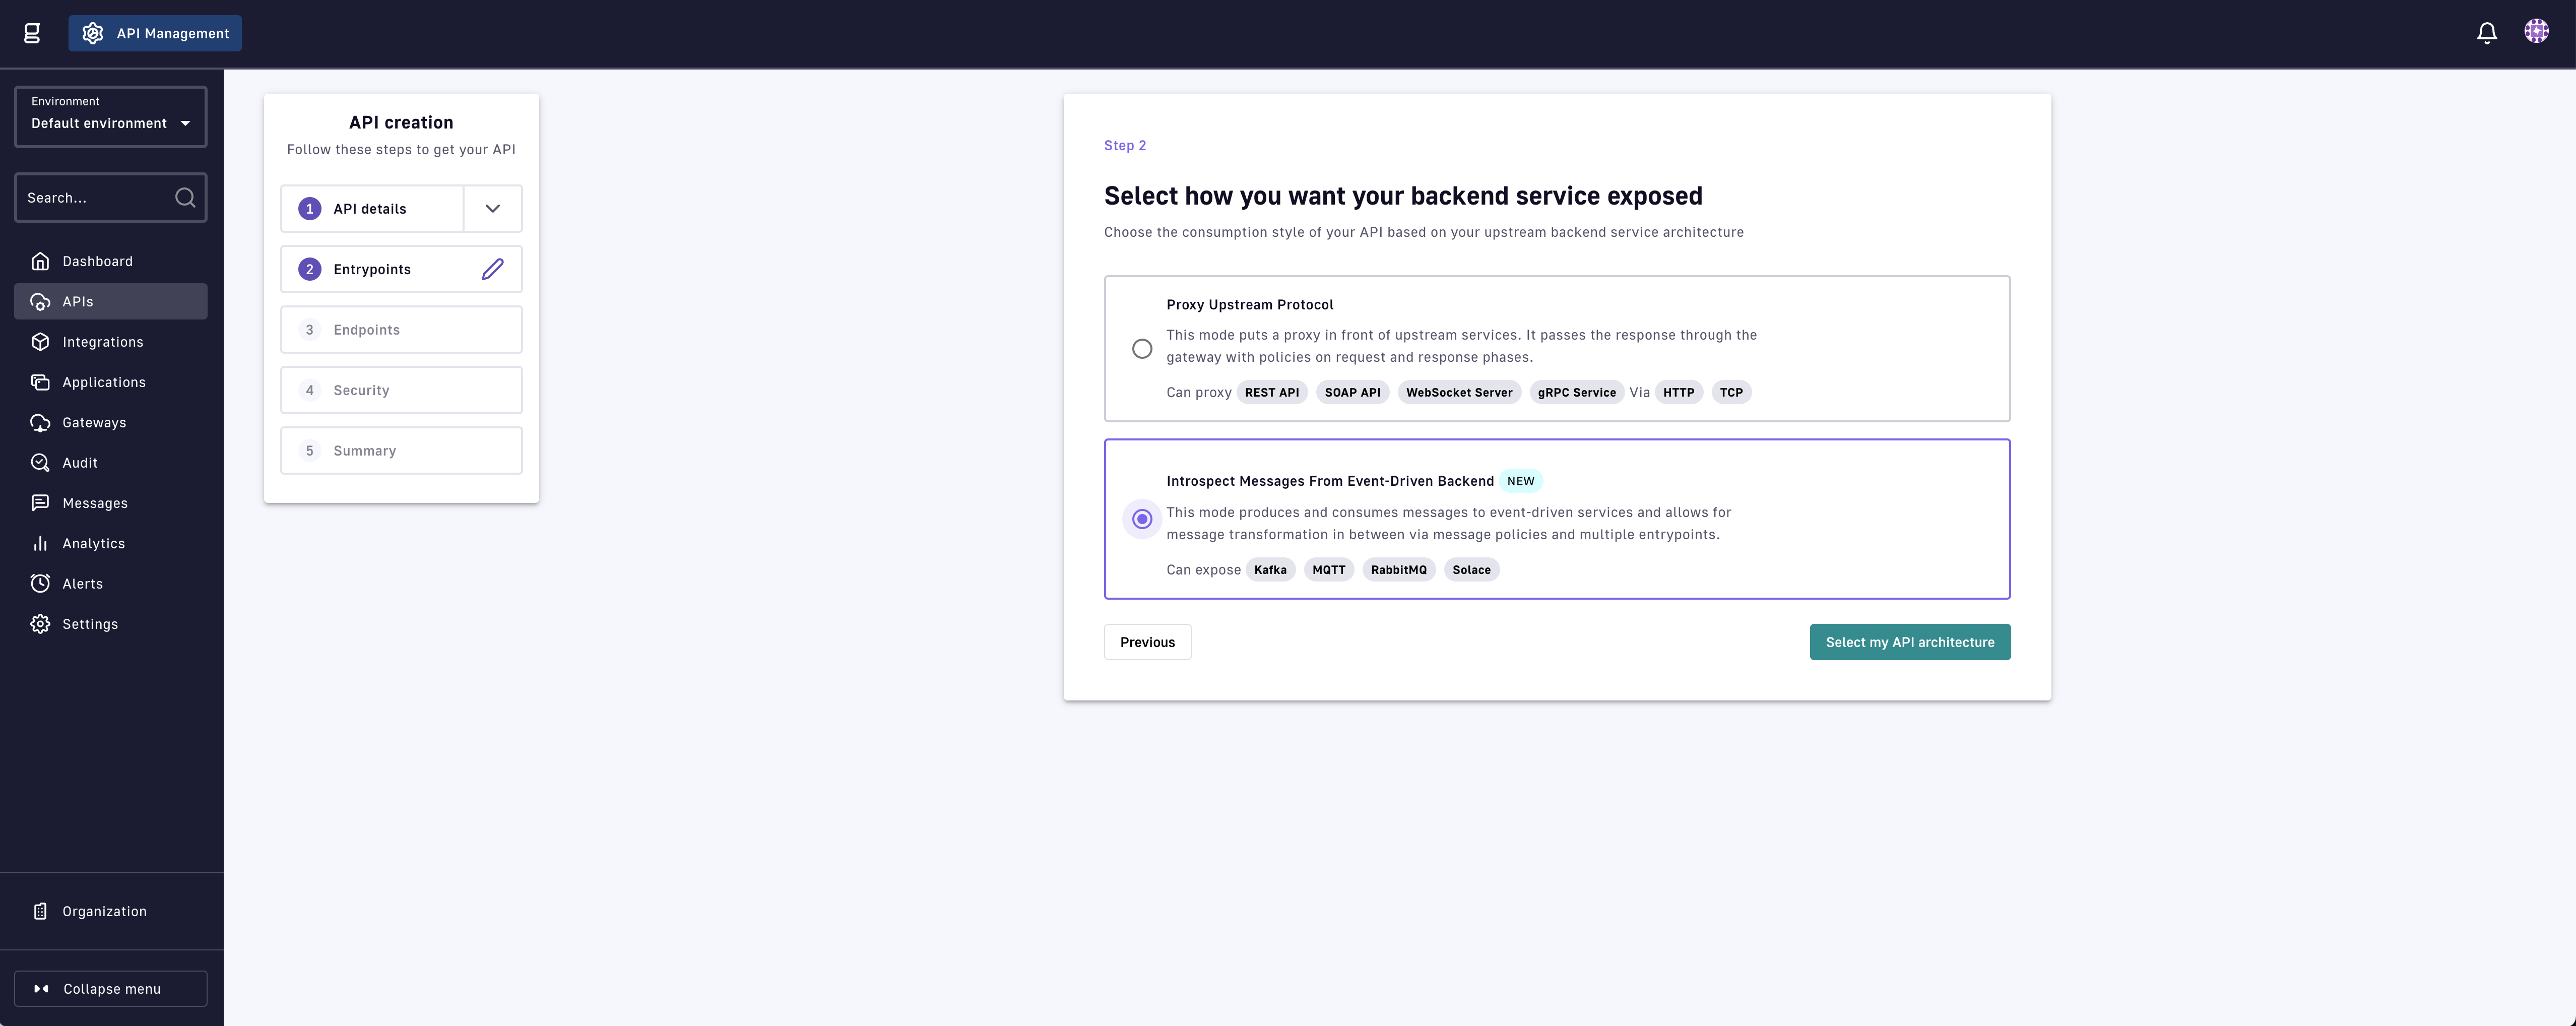 Select how you want your backend service exposed